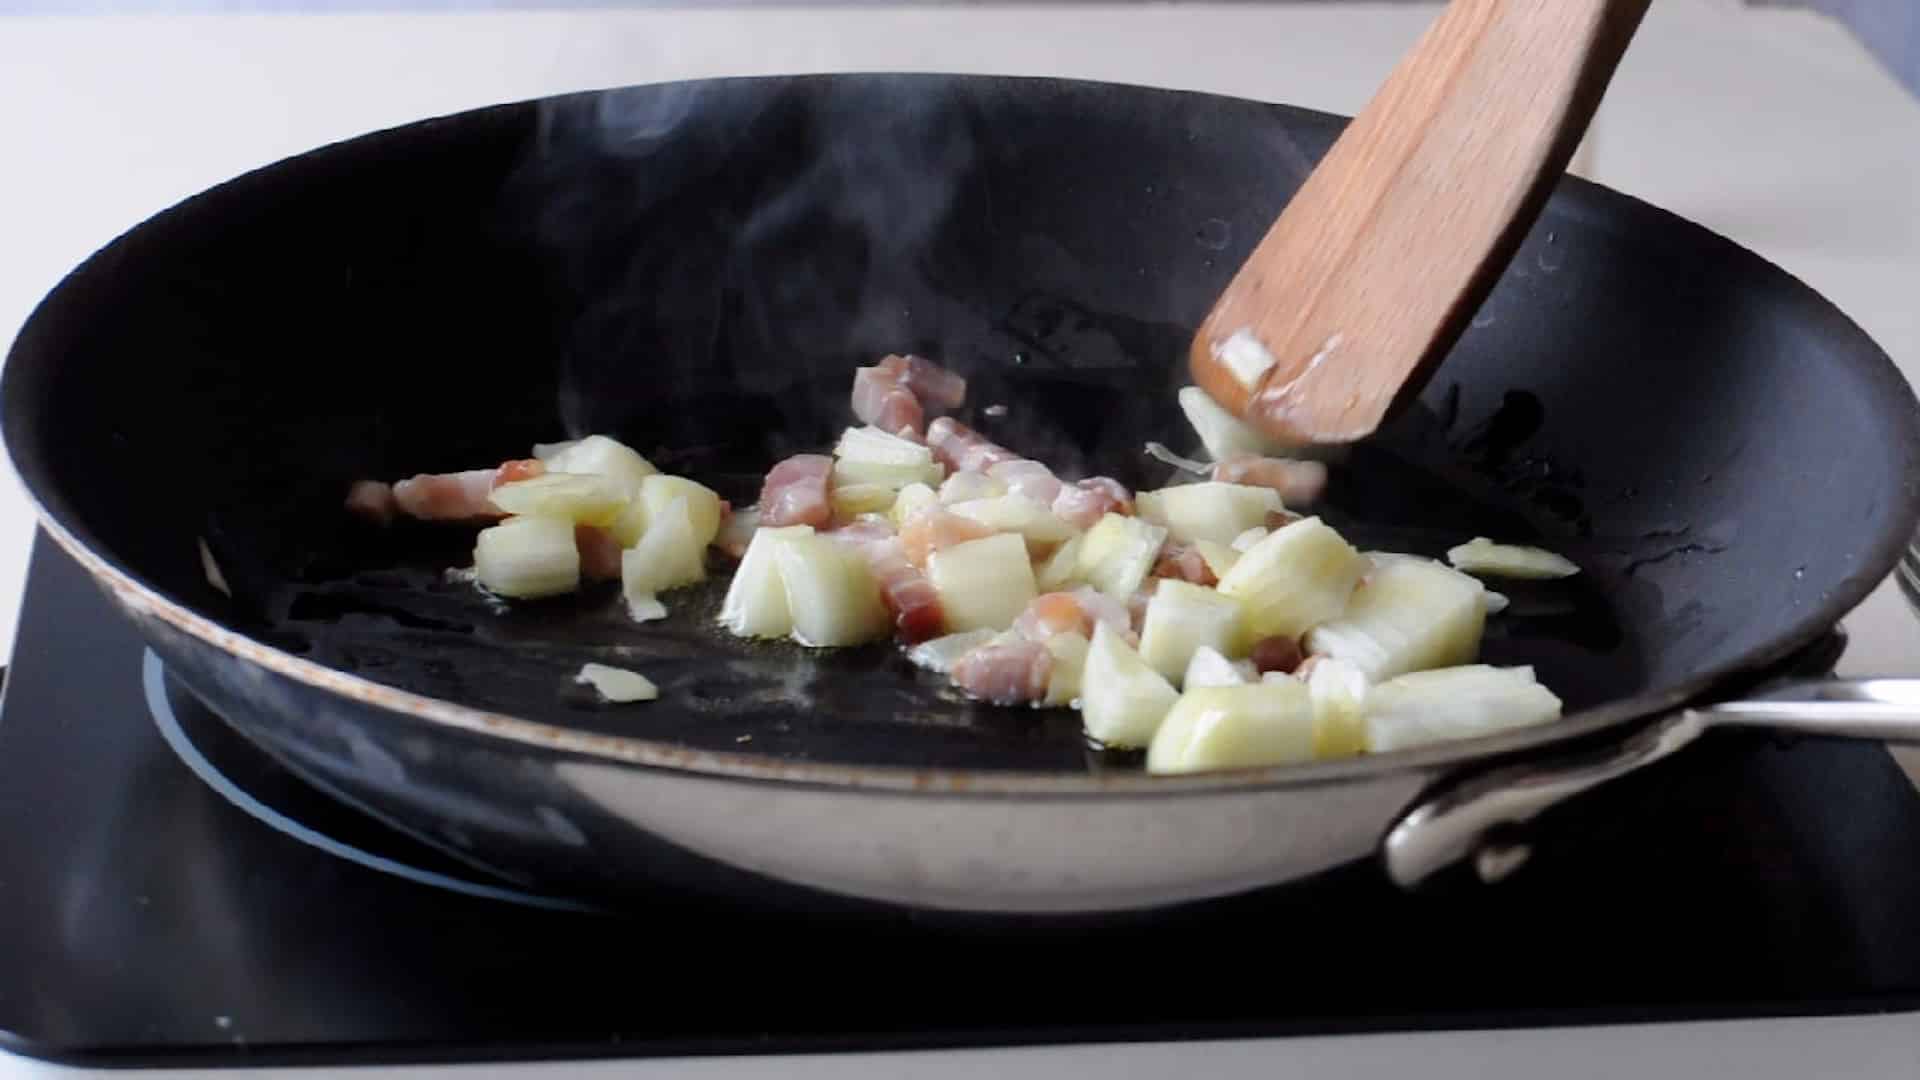 stir fry the onion and the bacon